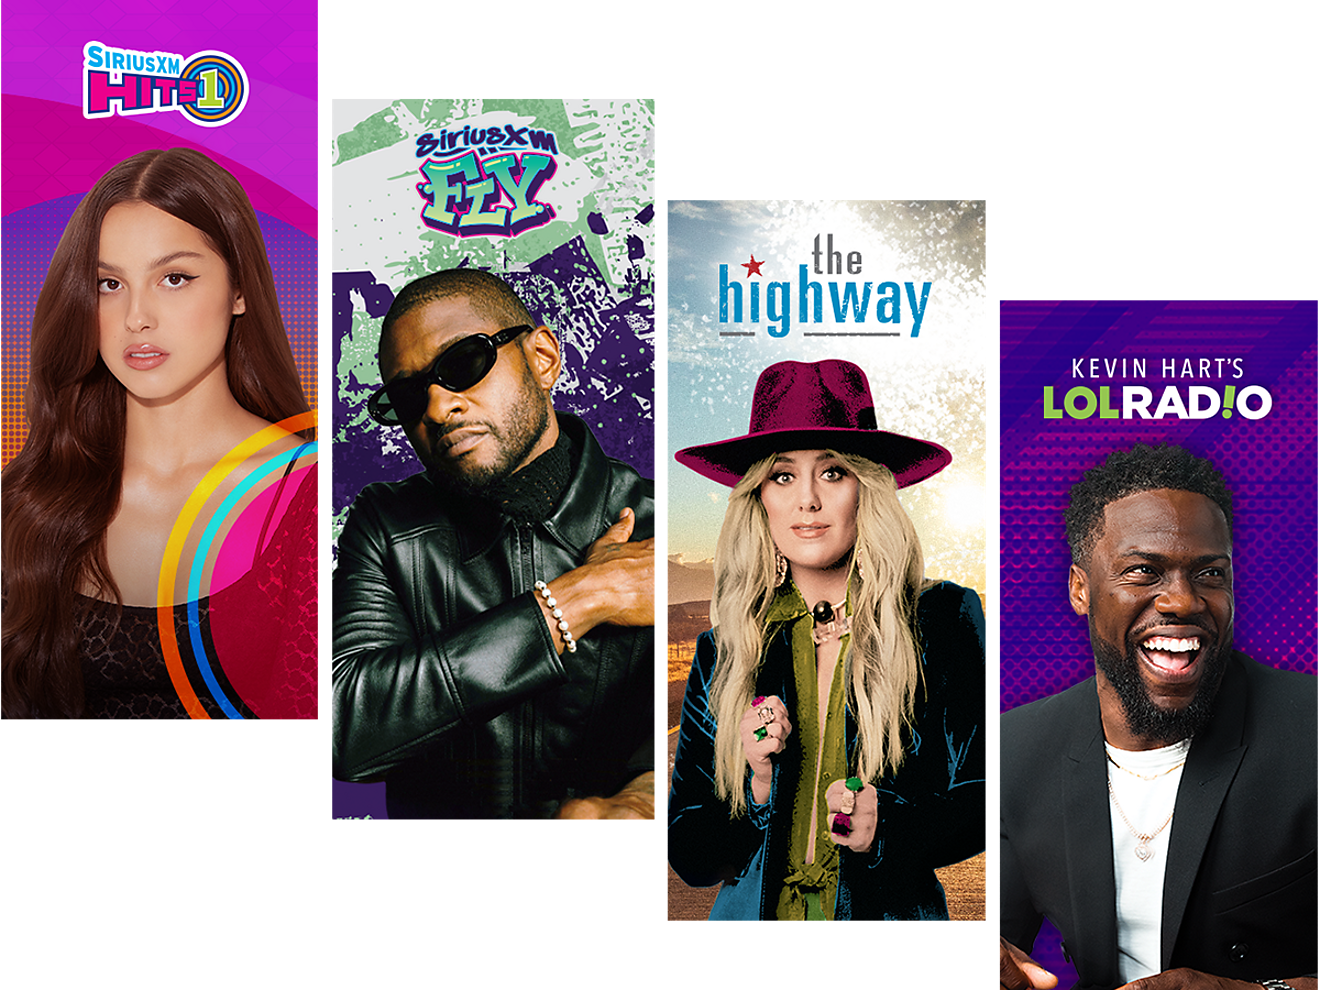 SiriusXM Hits 1, SiriusXM Fly, The Highway, Kevin Hart’s Laugh Out Loud Radio.